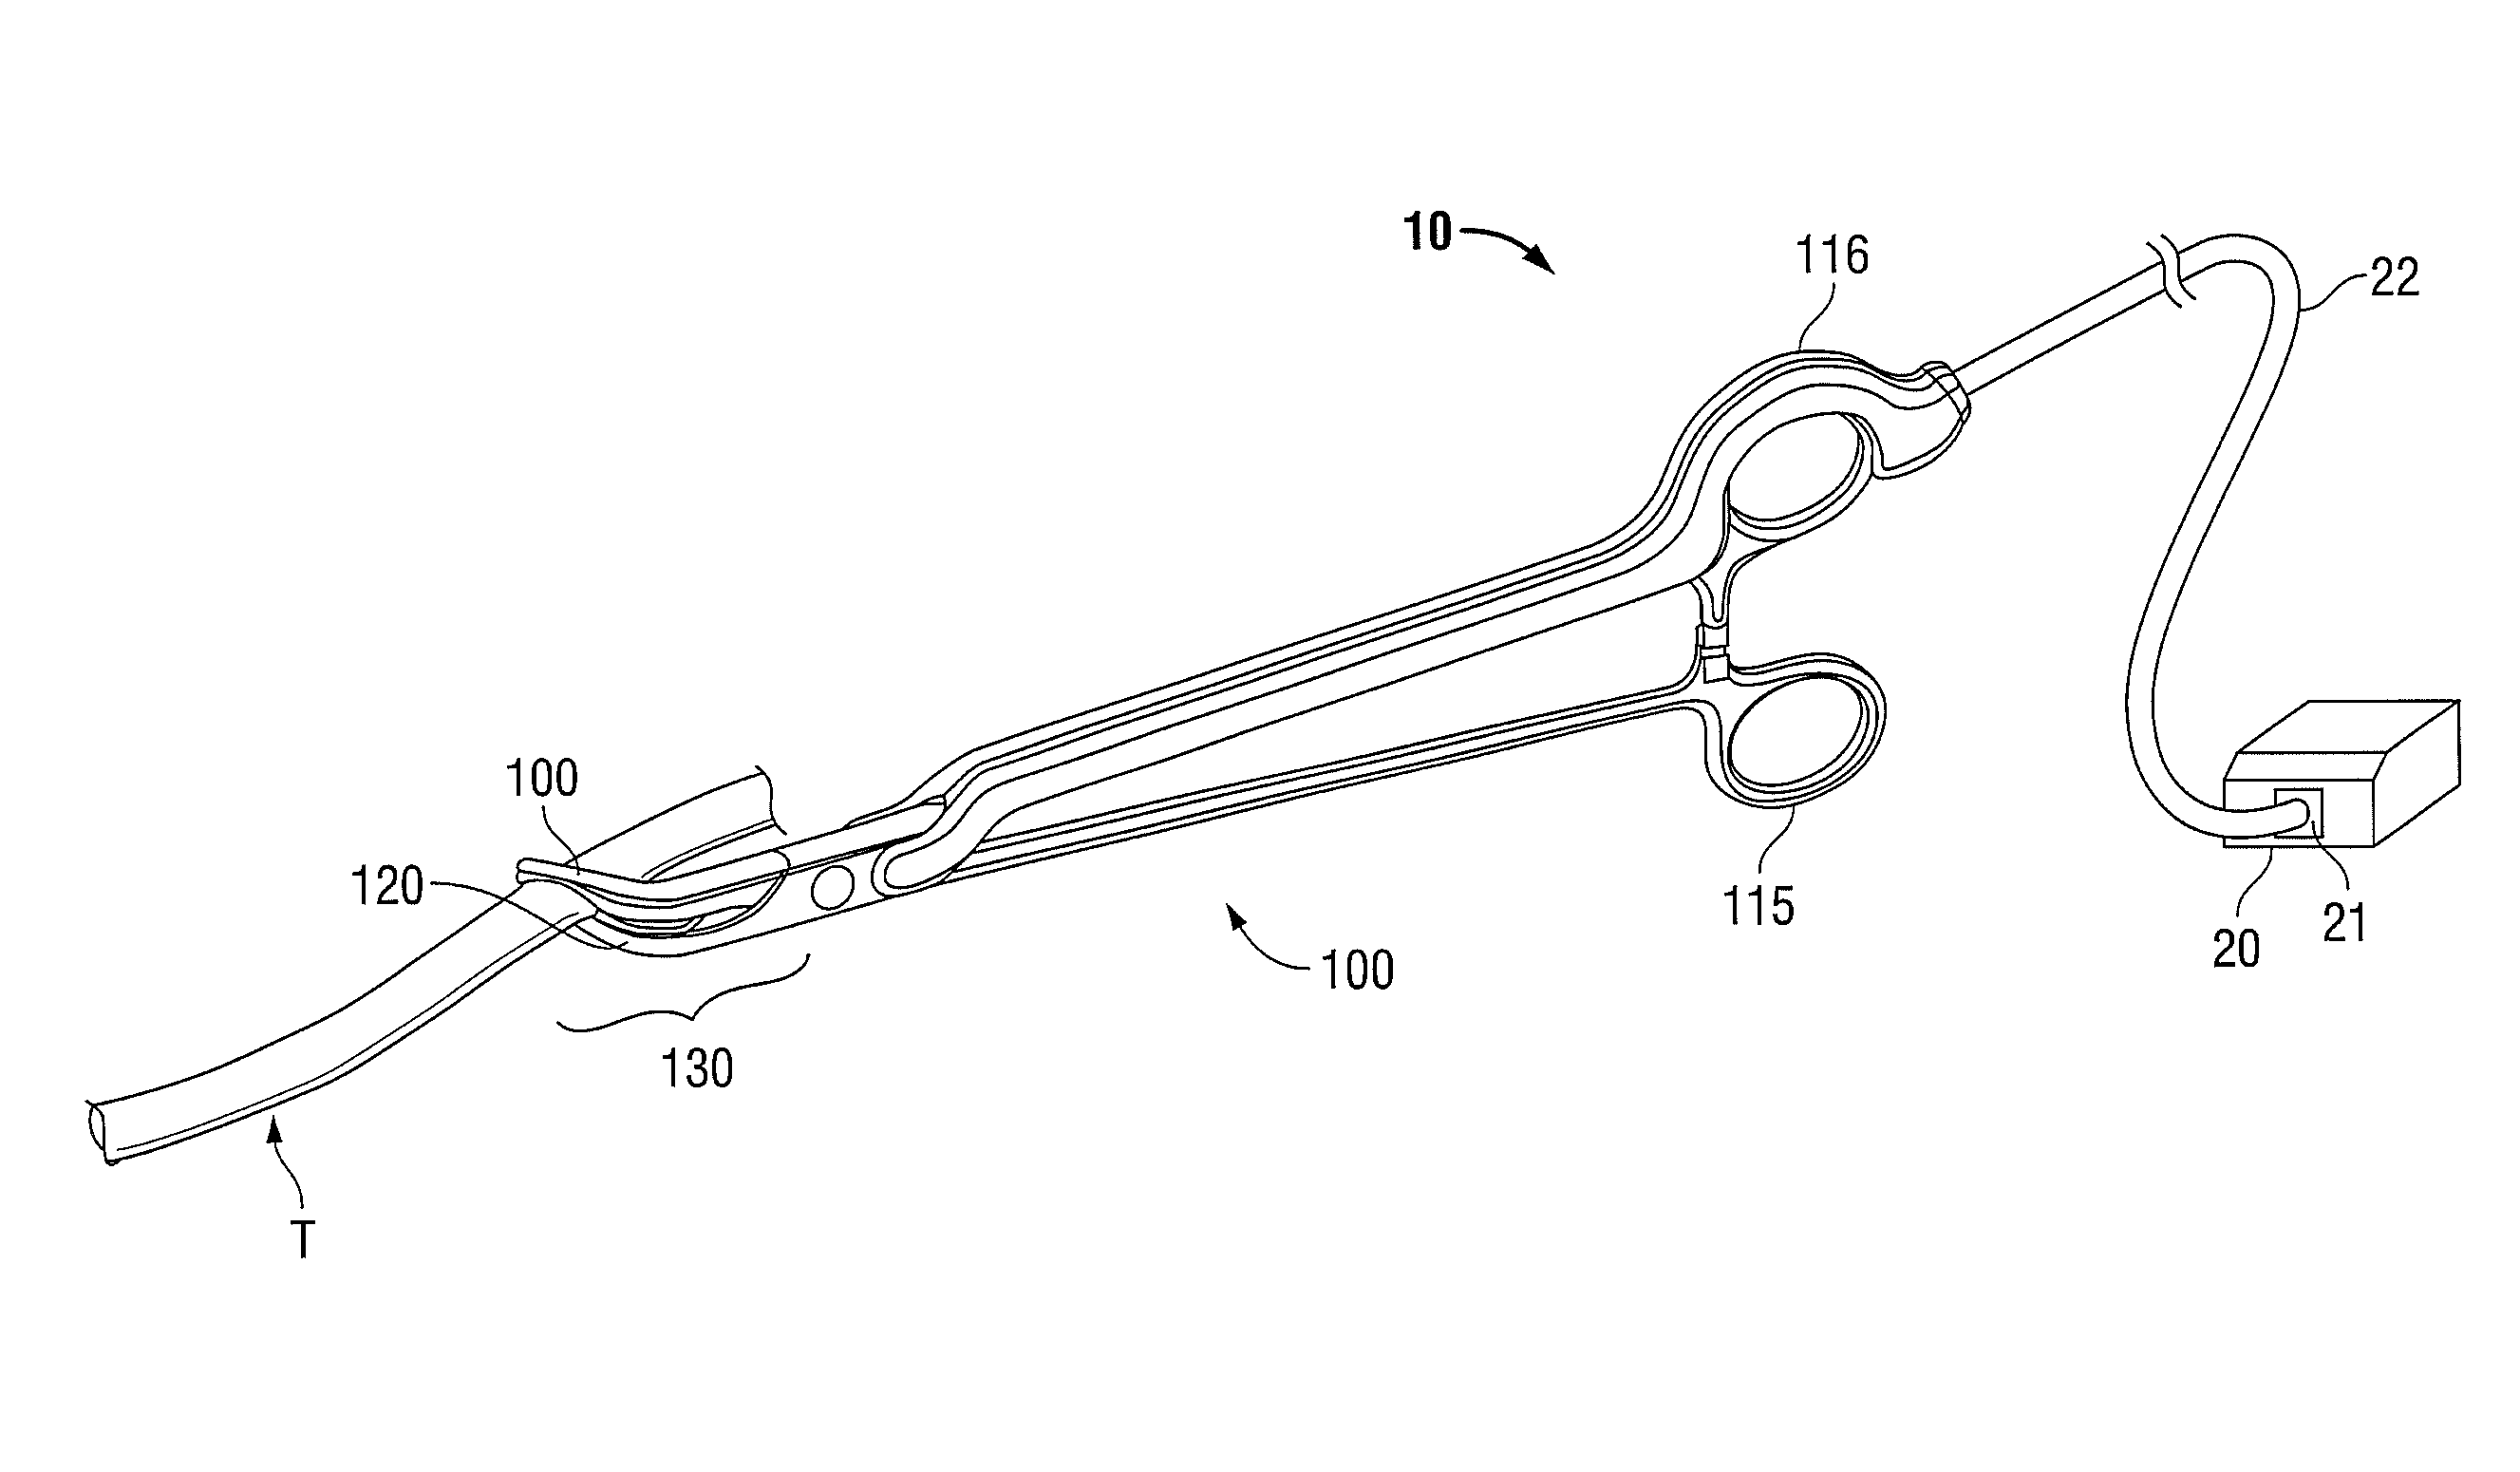 Method for manufacturing vessel sealing instrument with reduced thermal spread